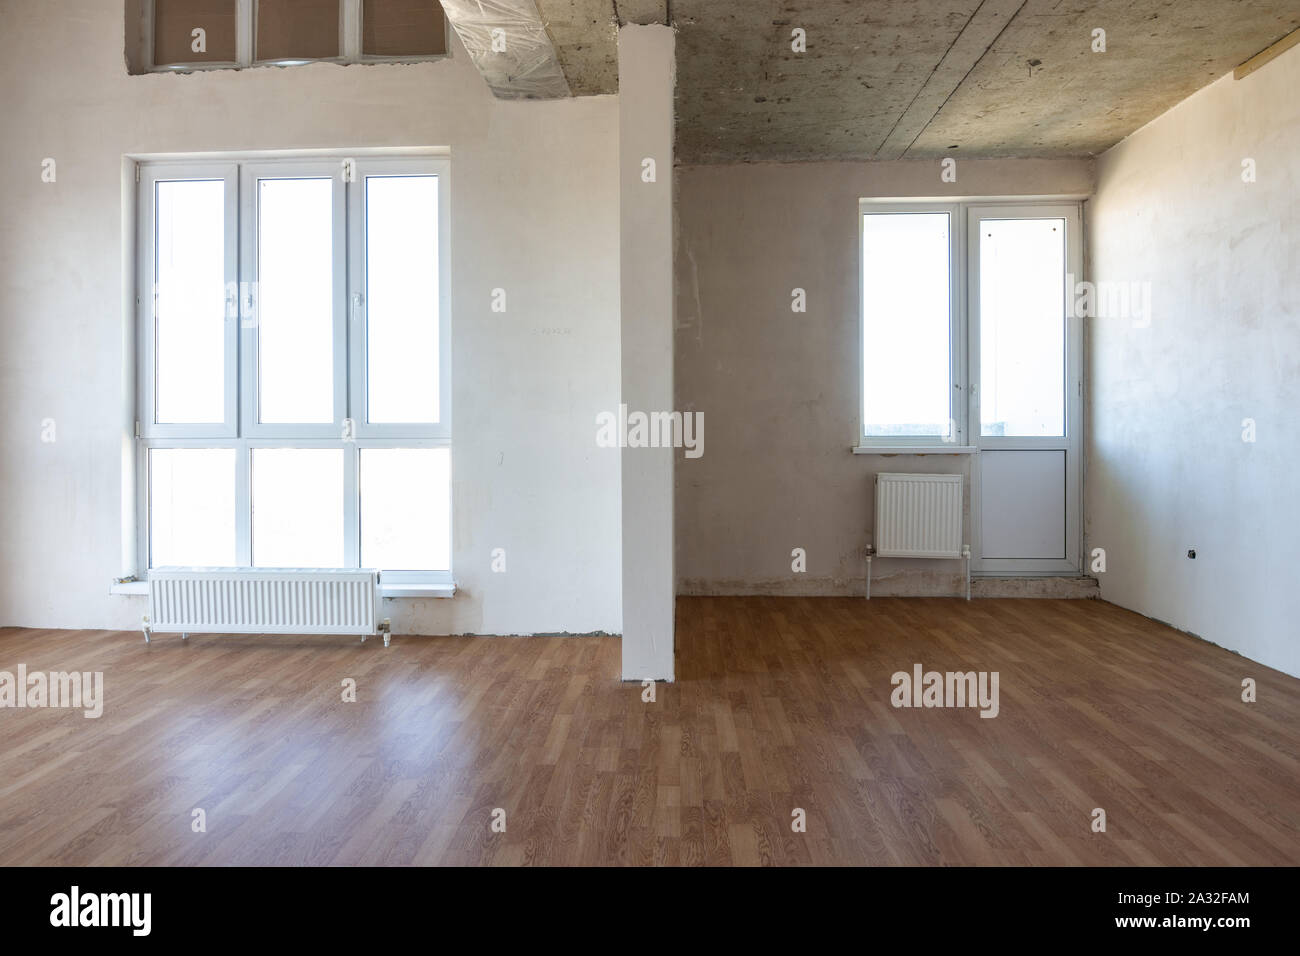 The interior of the empty room with a fine finish and laminated flooring Stock Photo